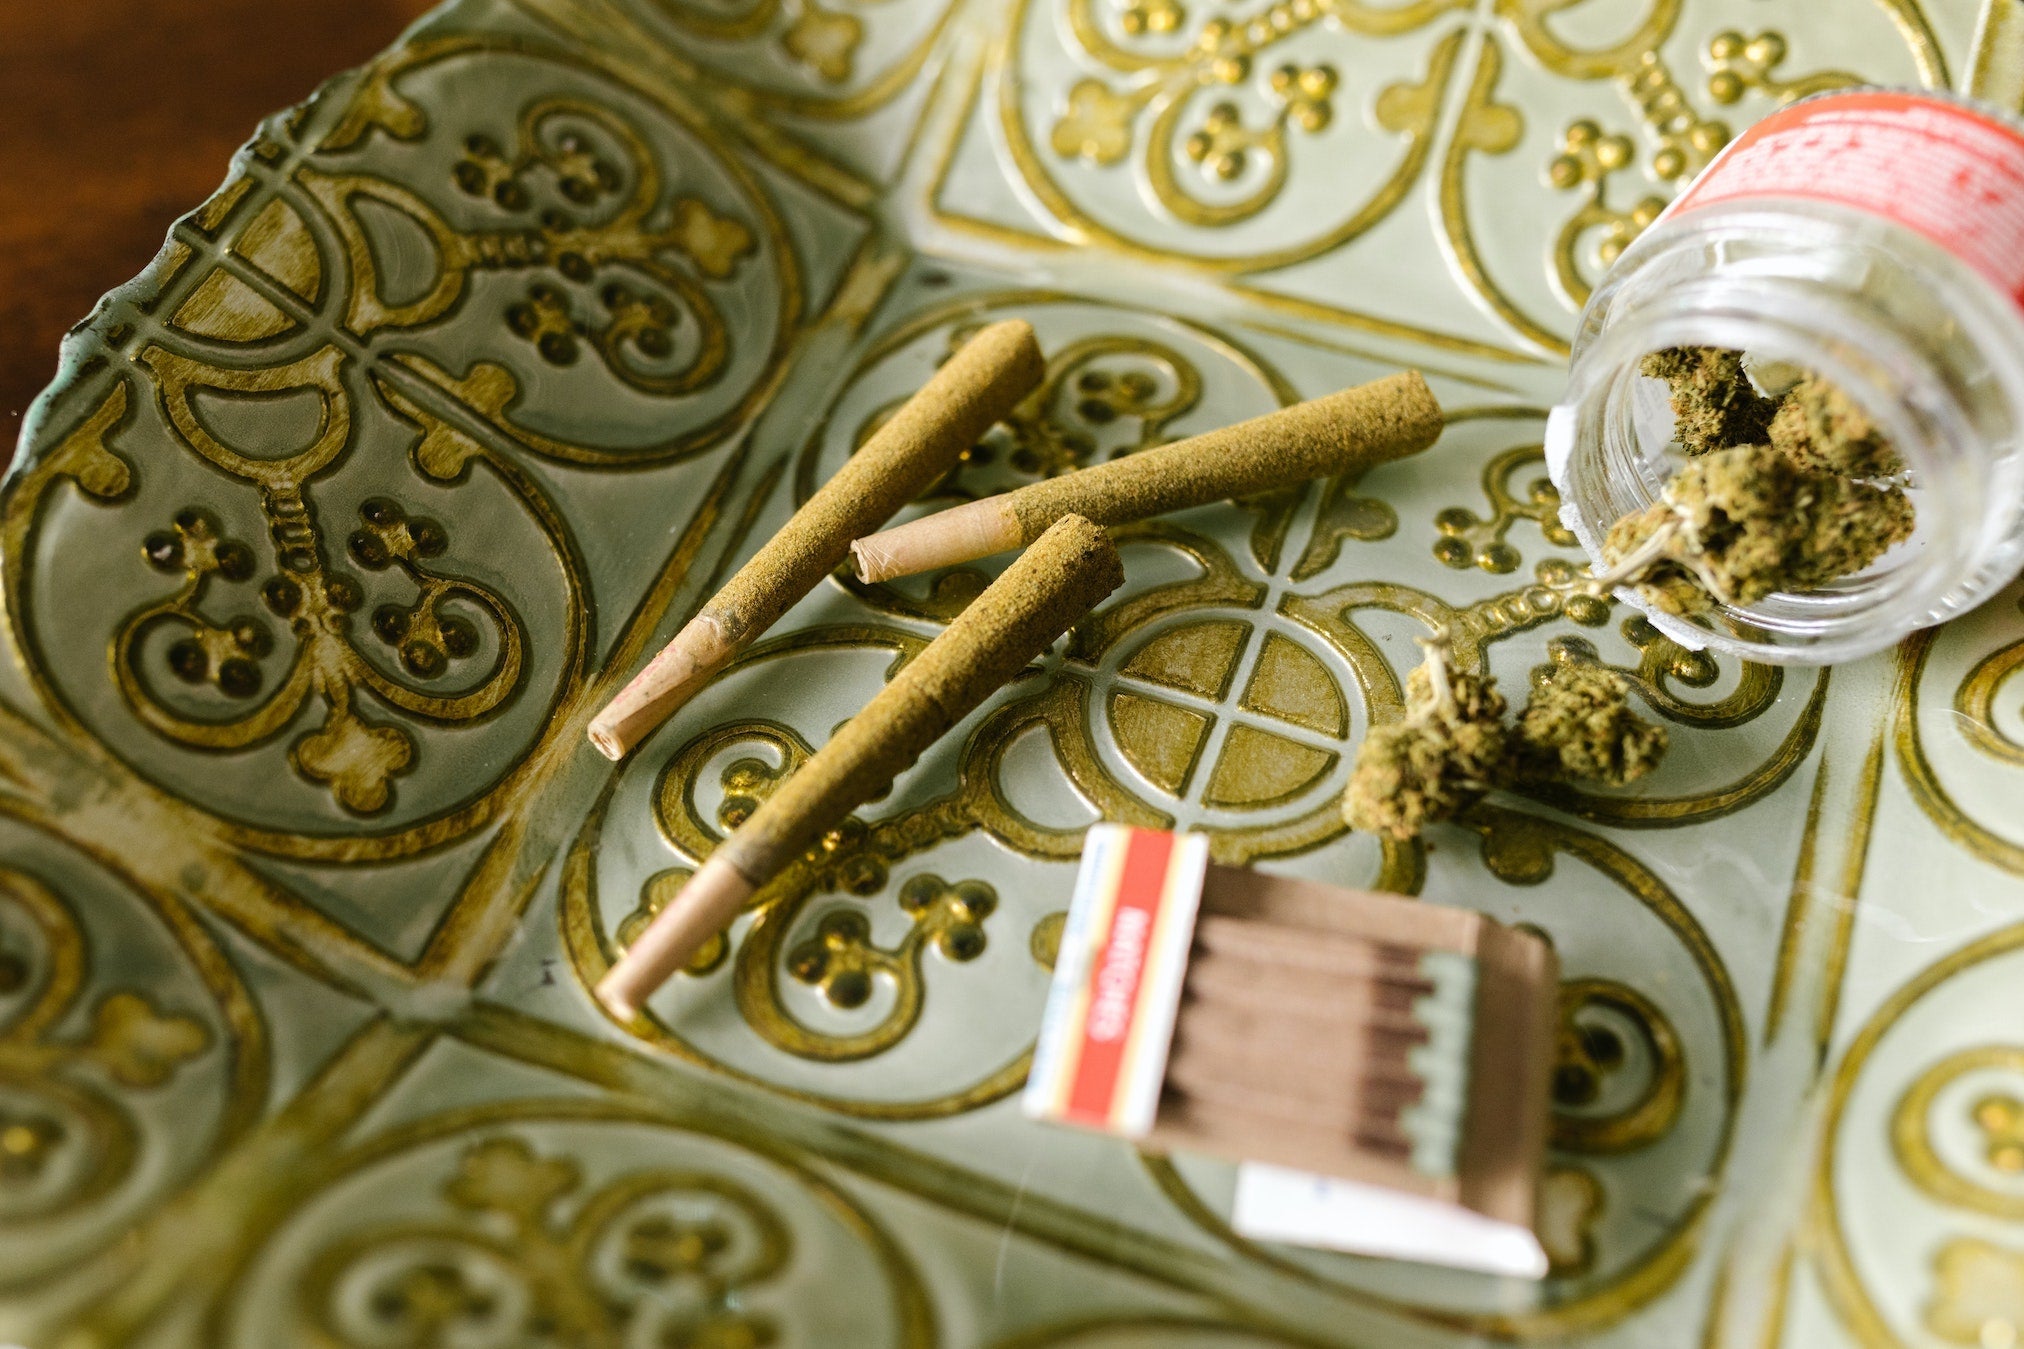 Rolling joints on table - Shell Shock